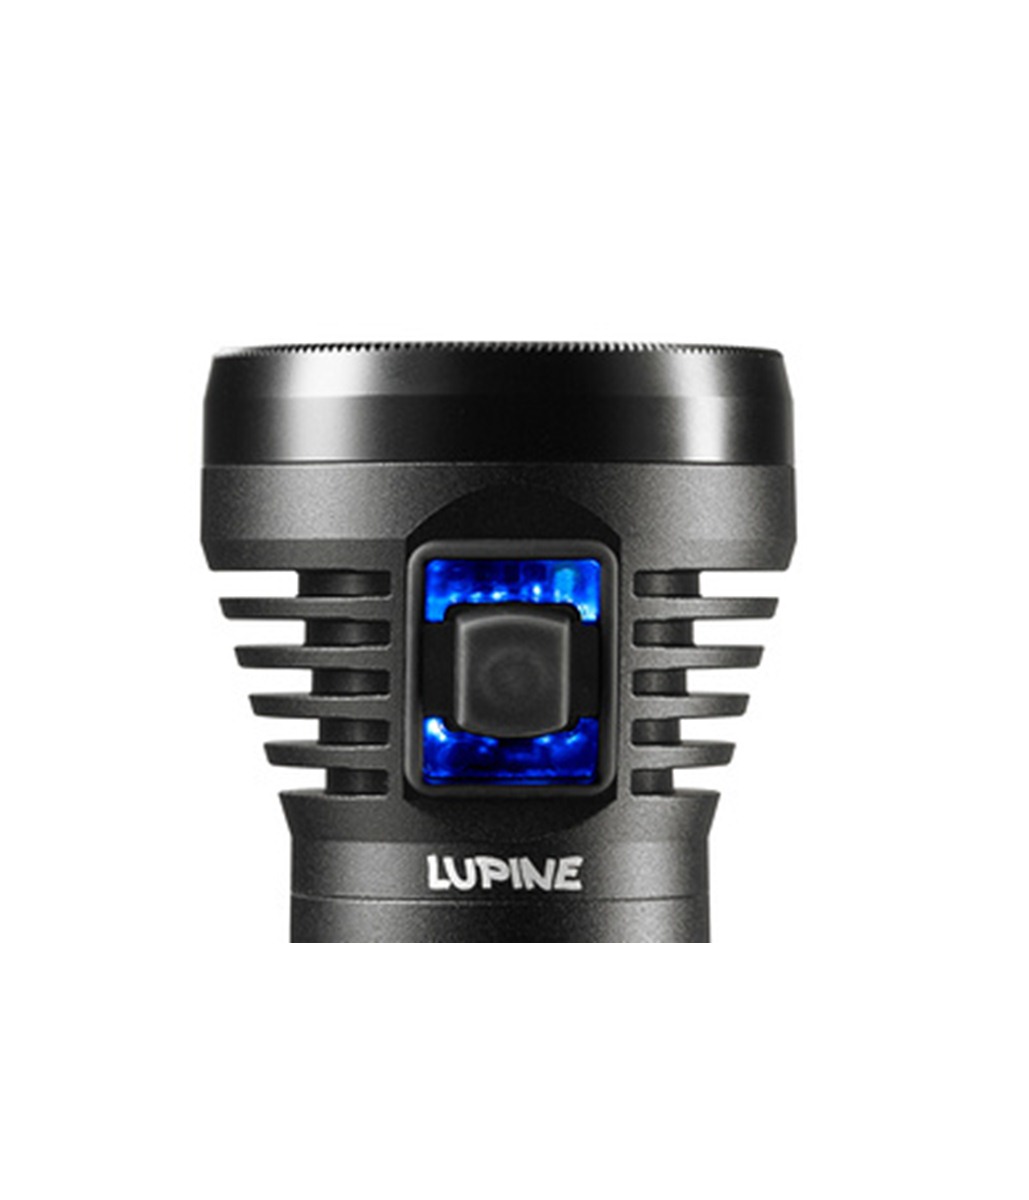 TORCIA LED LUPINE BETTY TL2 S 